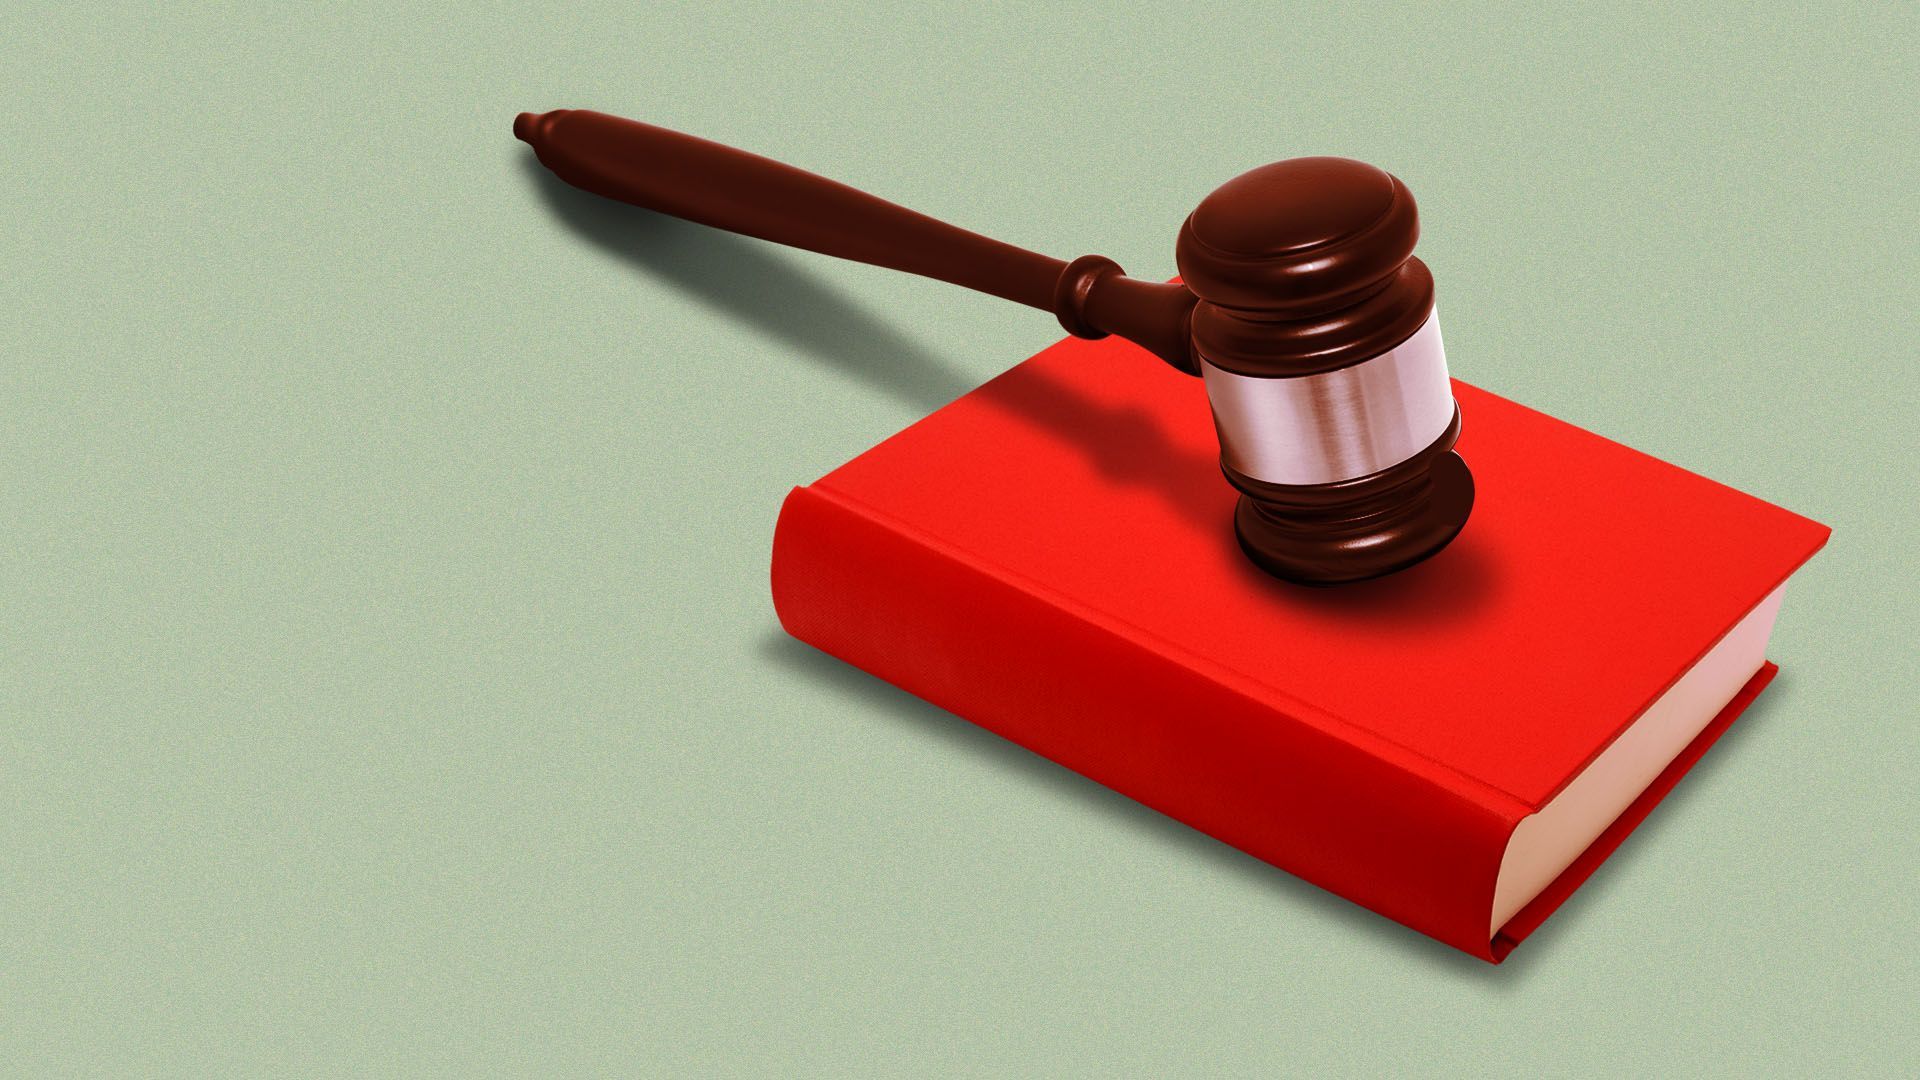 Illustration of a gavel on a book instead of a block.